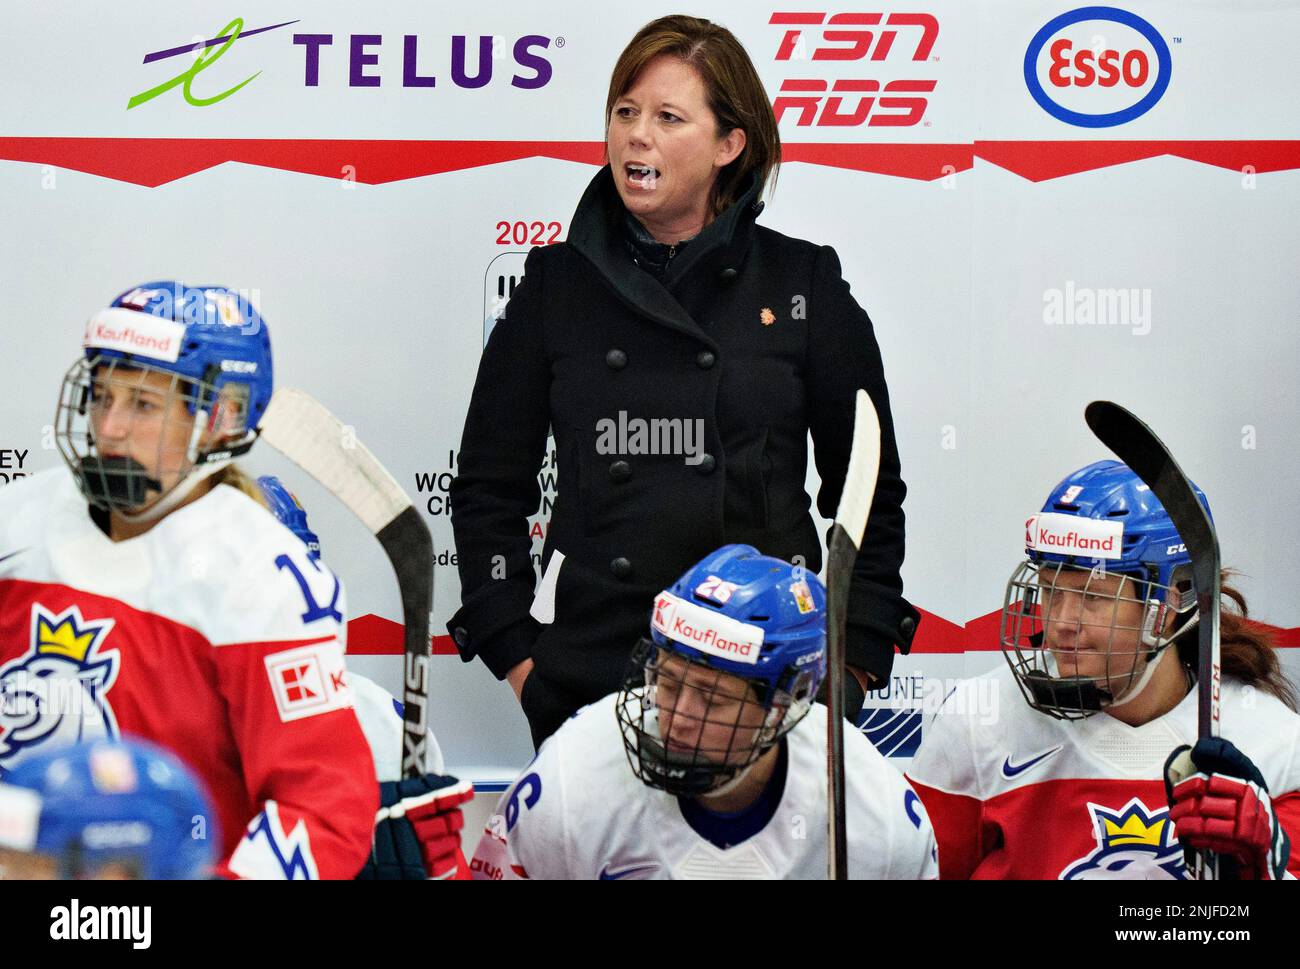 Czech Republic coach Carla Macleod during the IIHF World Championship Womans ice hockey match between Sweden and Czech Republic in Frederikshavn, Denmark, Tuesday, Aug 30, 2022